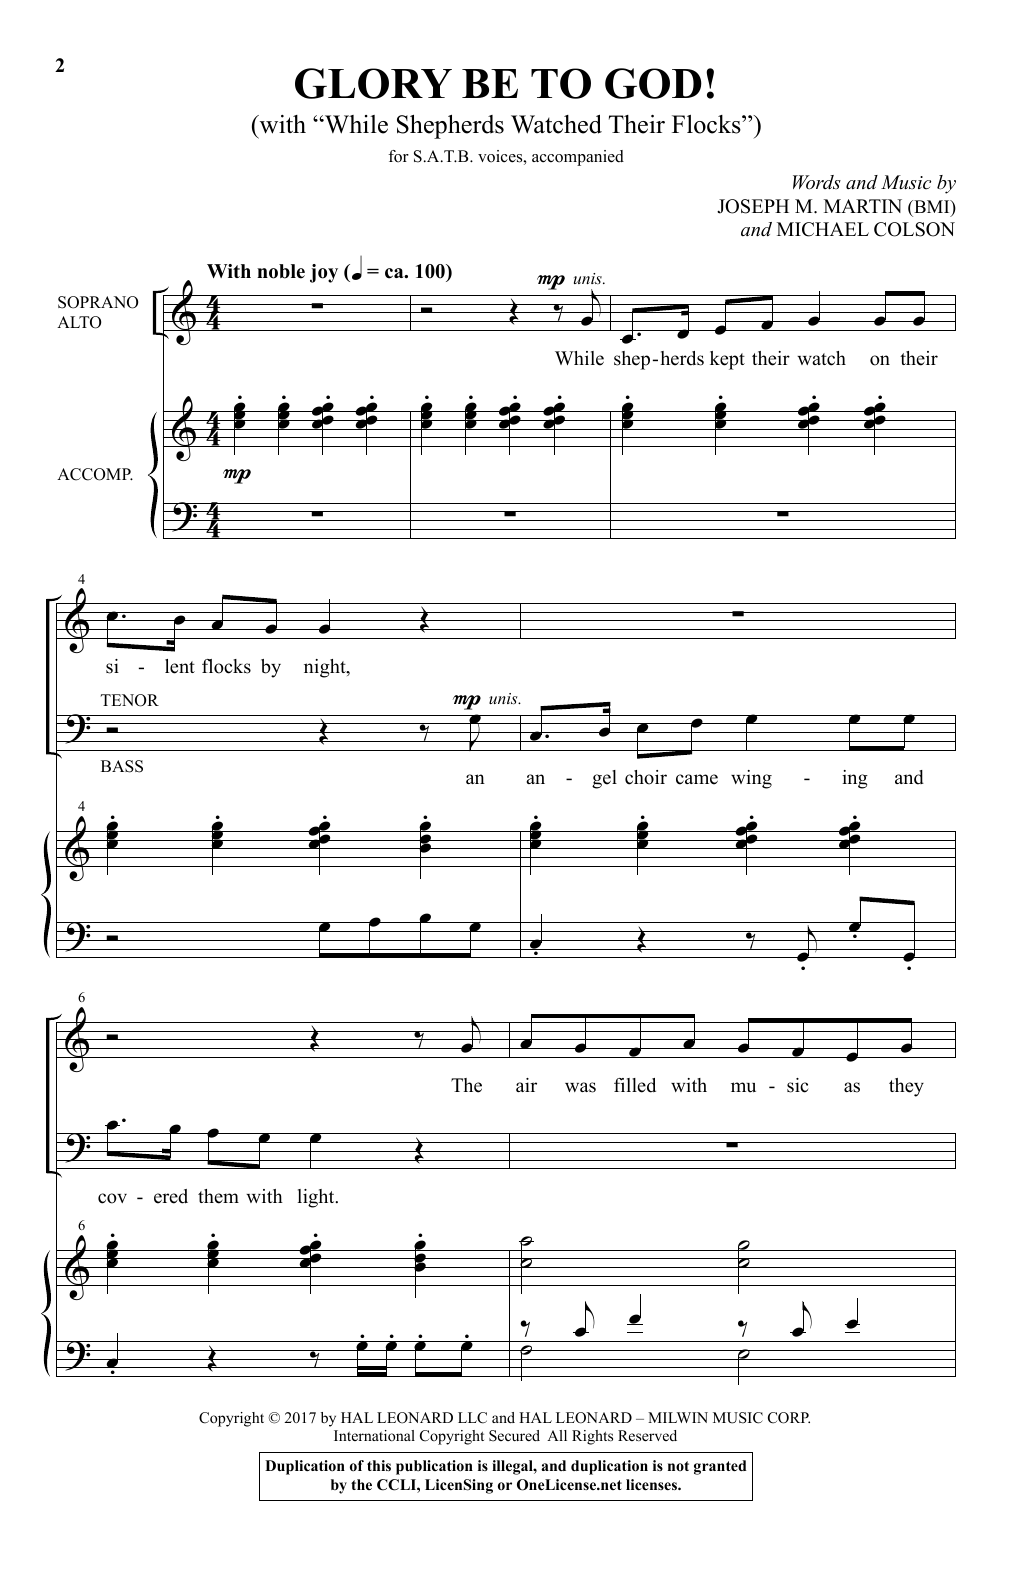 Download Joseph M. Martin Glory Be To God! (With While Shepherds Sheet Music